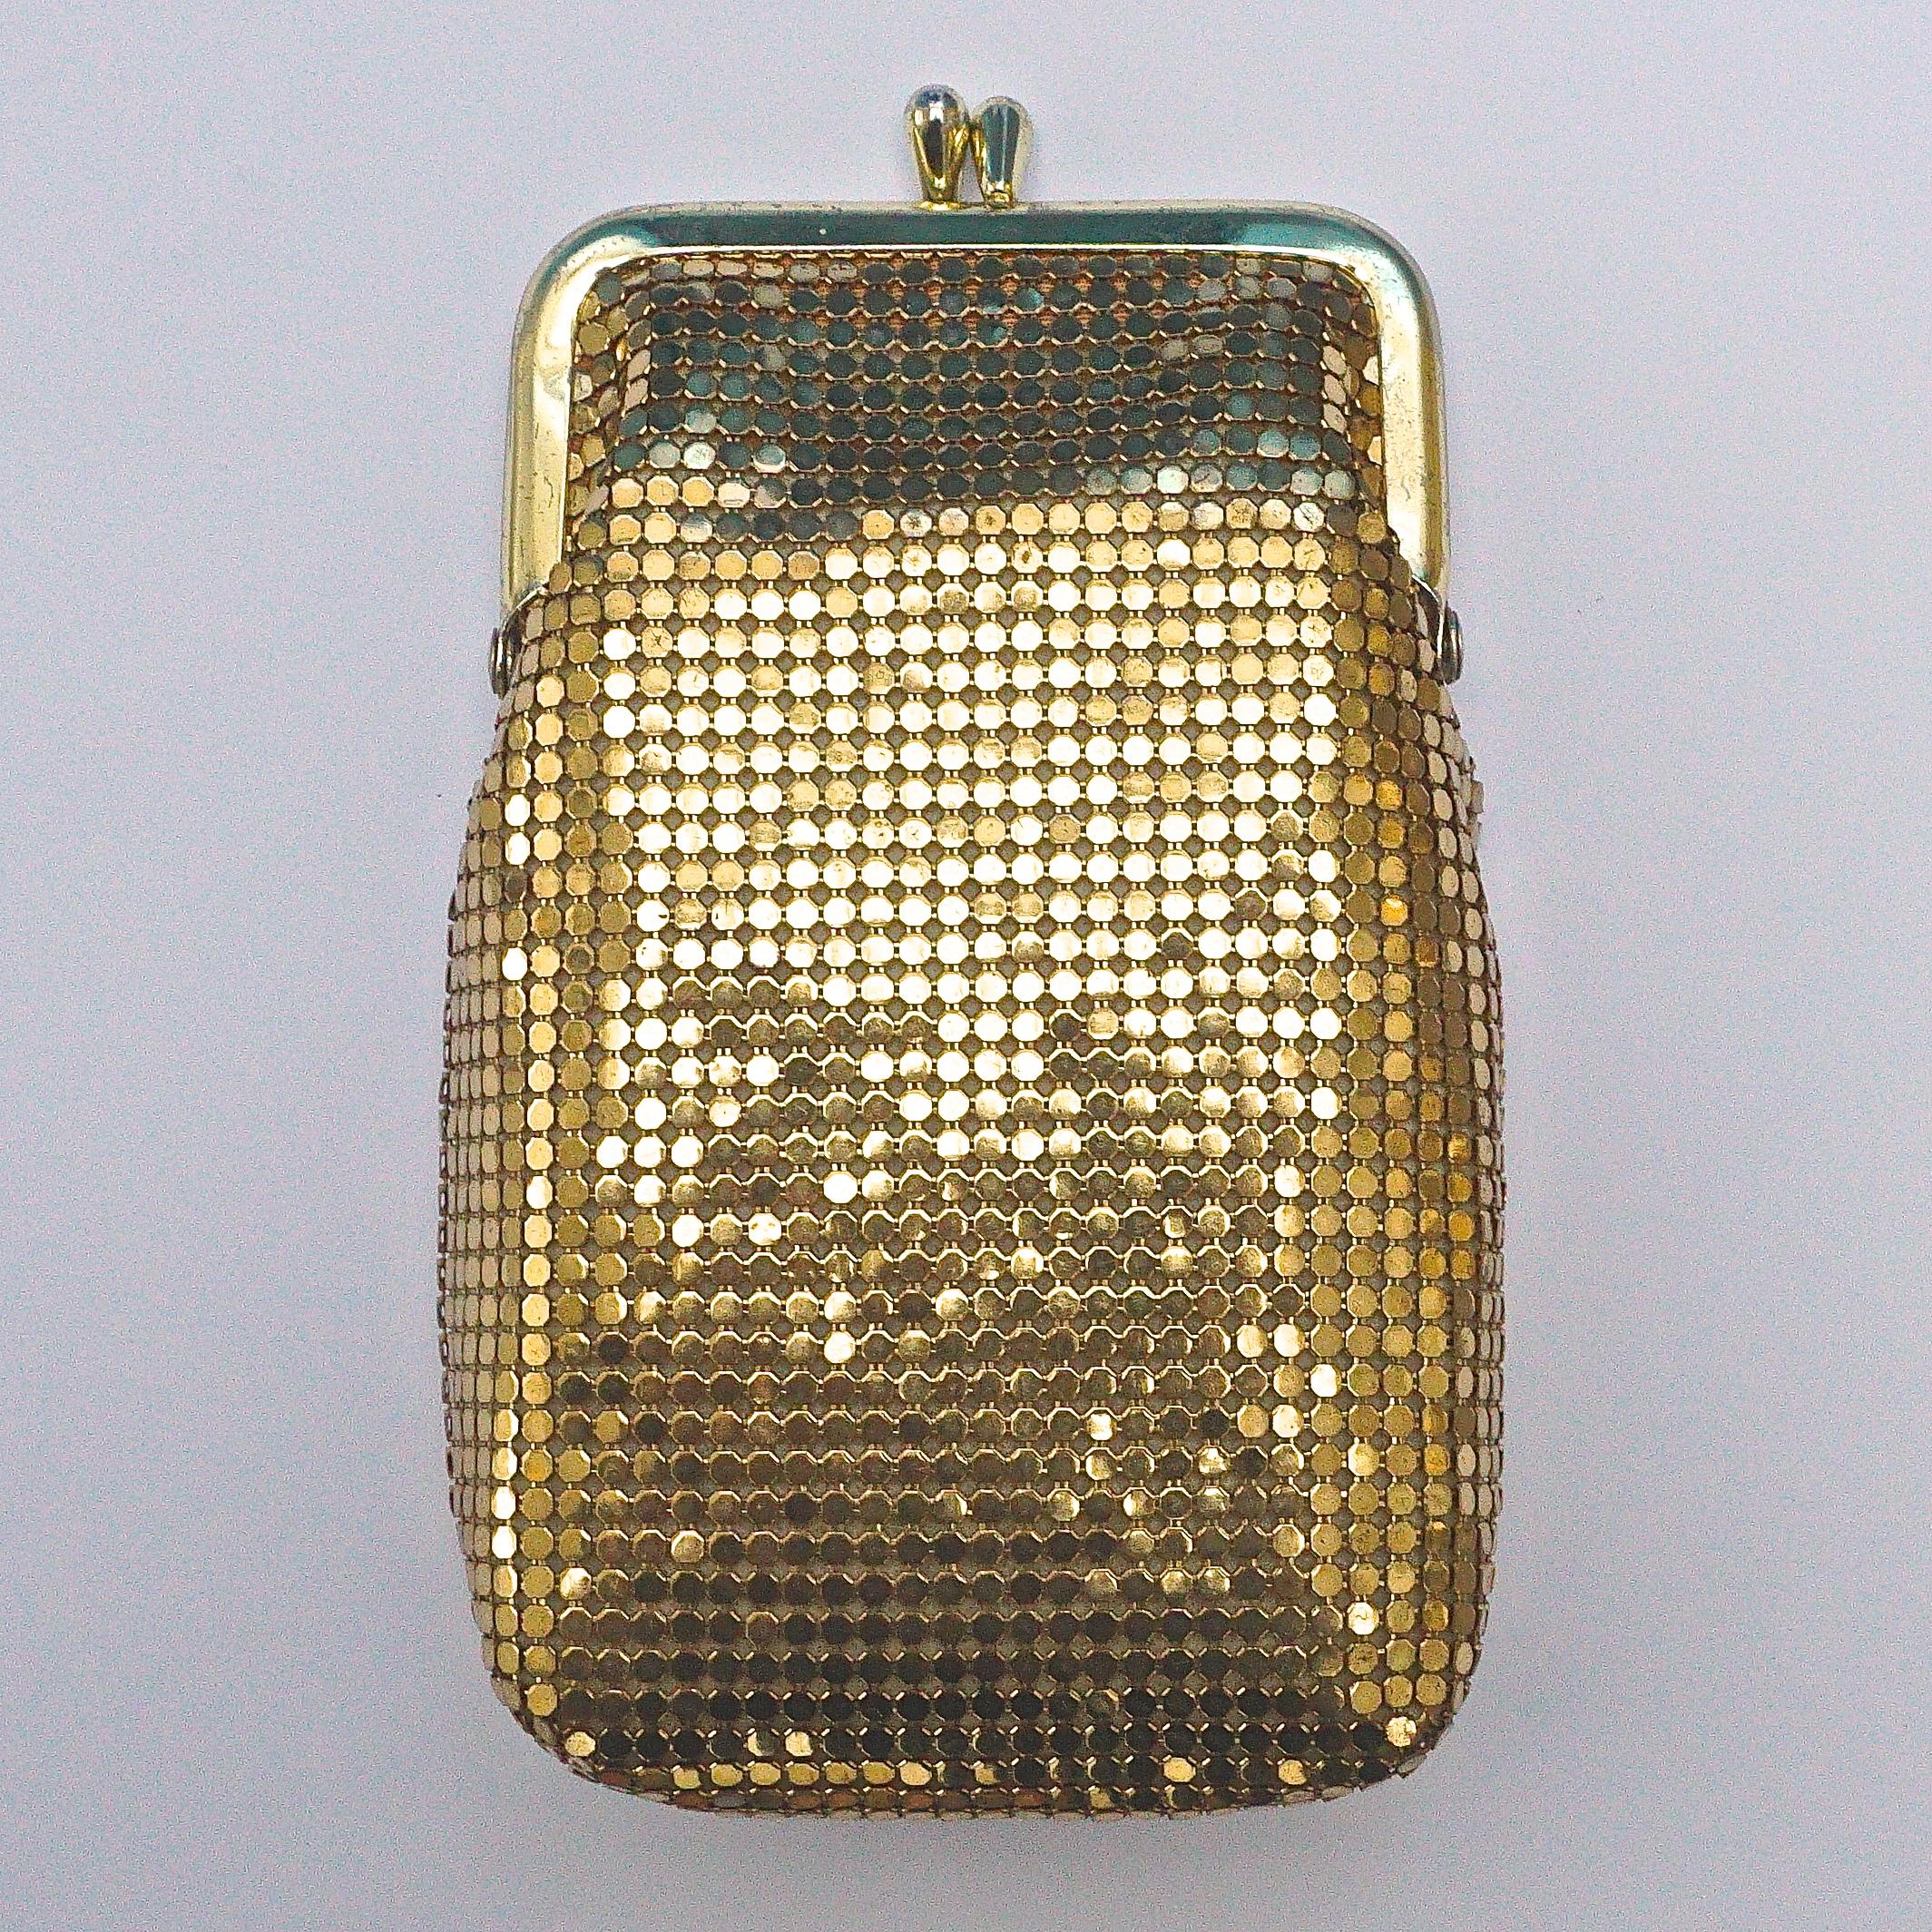 Whiting & Davis beautiful gold mesh purse, and a gold mesh key holder in the style of Whiting & Davis. The purse is length 14cm / 5.5 inches by width 8.5cm / 3.3 inches. The peach lining is in very good condition. The metal fittings have some